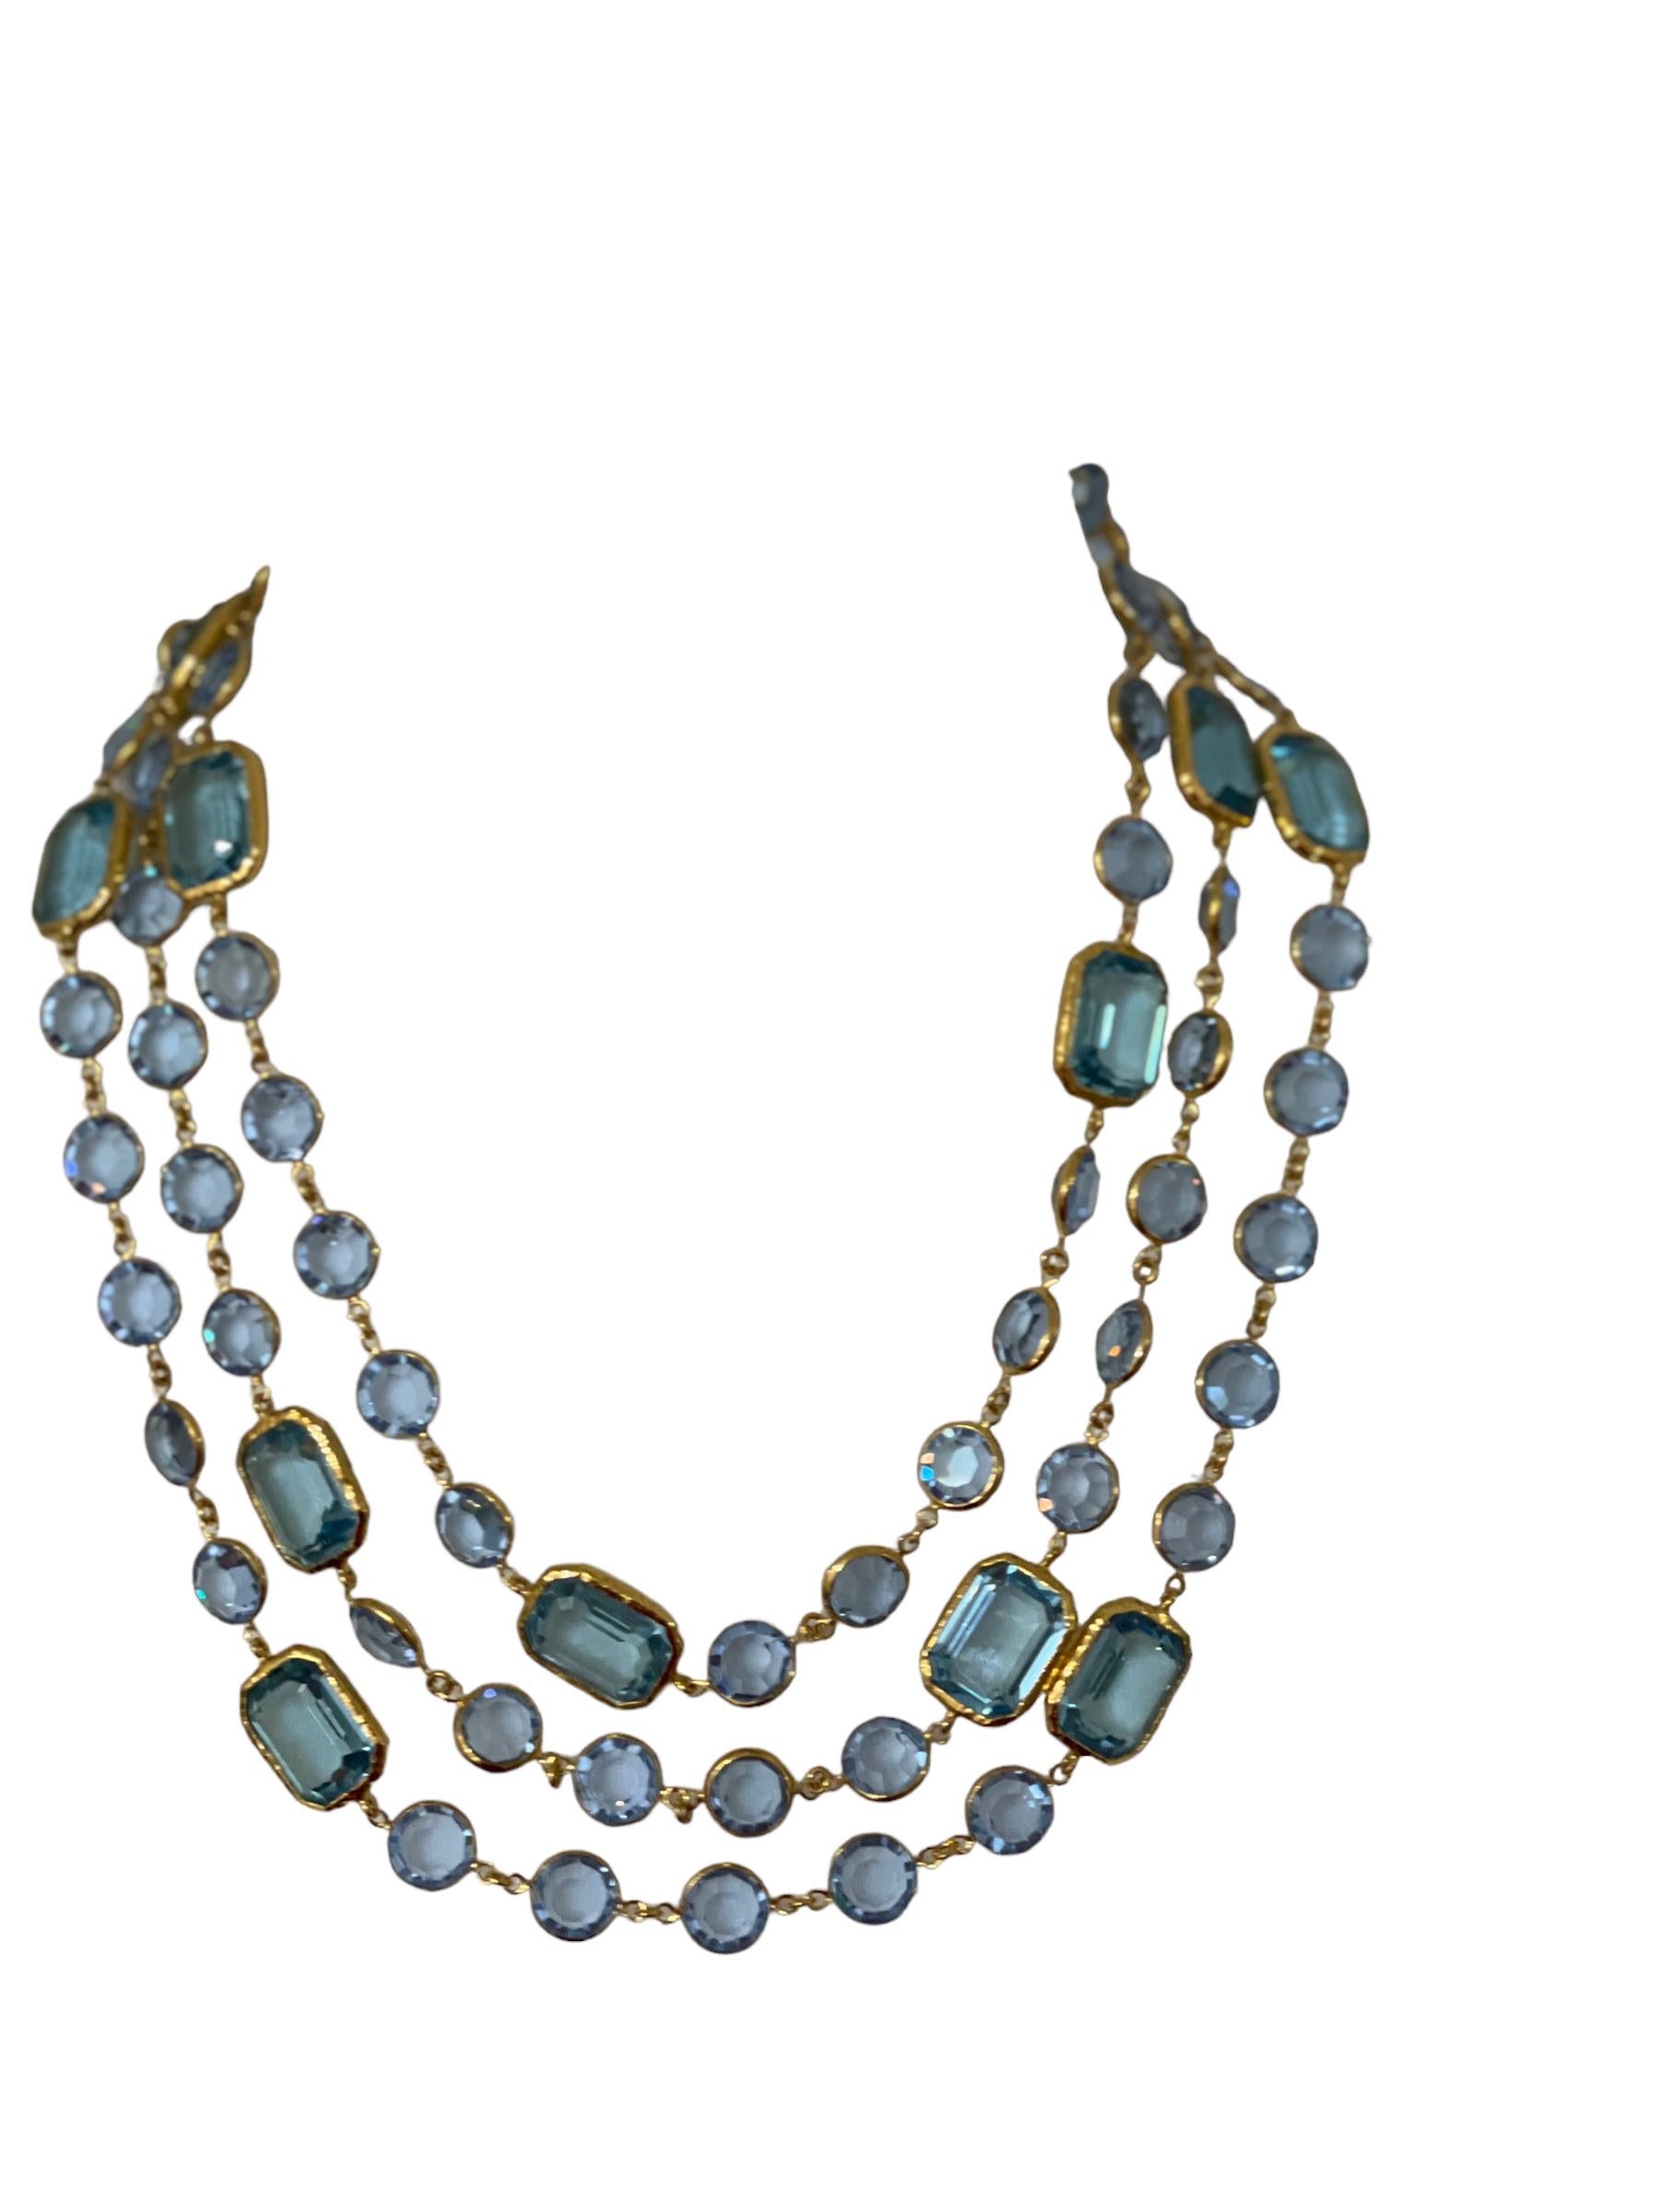 This necklace is reminiscent of the iconic chicklet design from the 80s. Aqua blue rectangle and round bezeled Swarovski crystals set on Vermeil( silver plated gold)..
Its length allows to wear it doubled, tripled and also as a lariat.
Wrap it